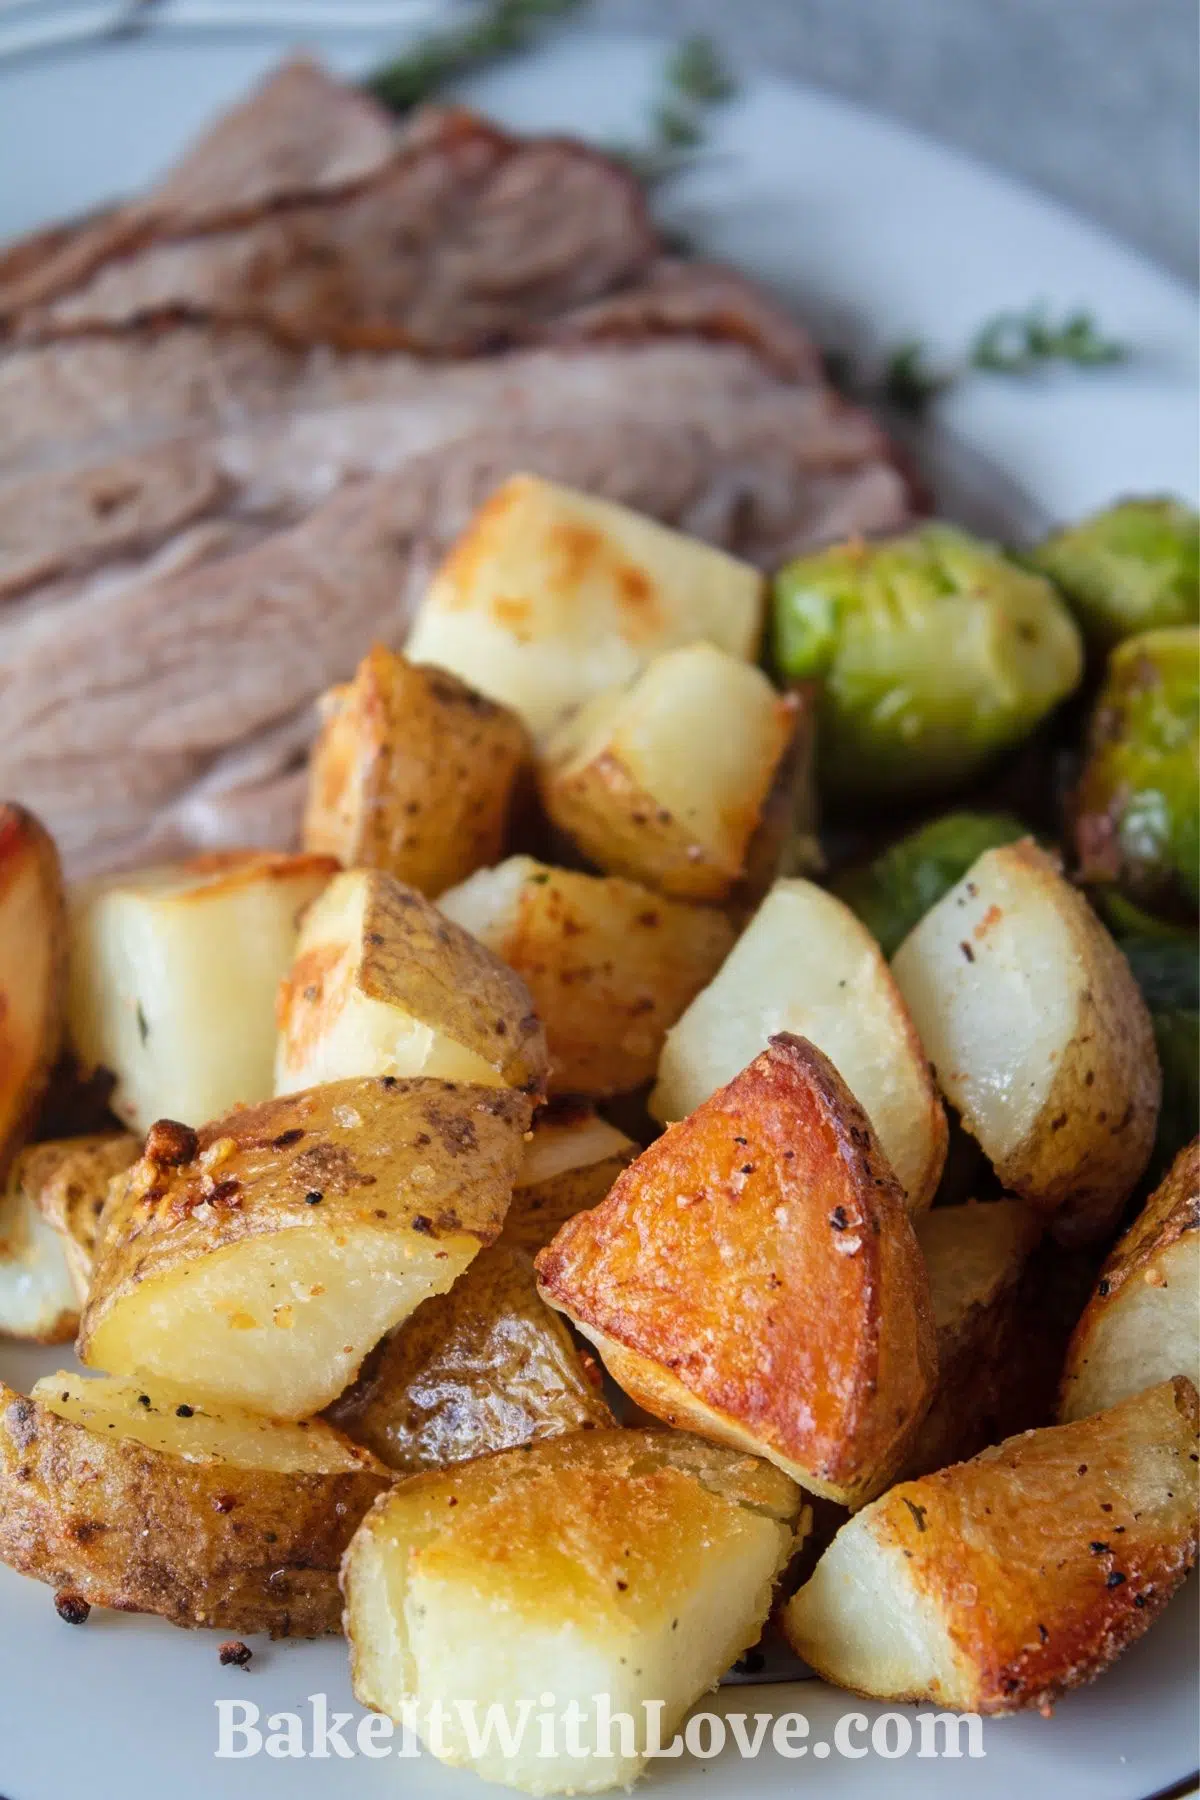 Crispy oven roasted potatoes served on platter with roast and vegetables.